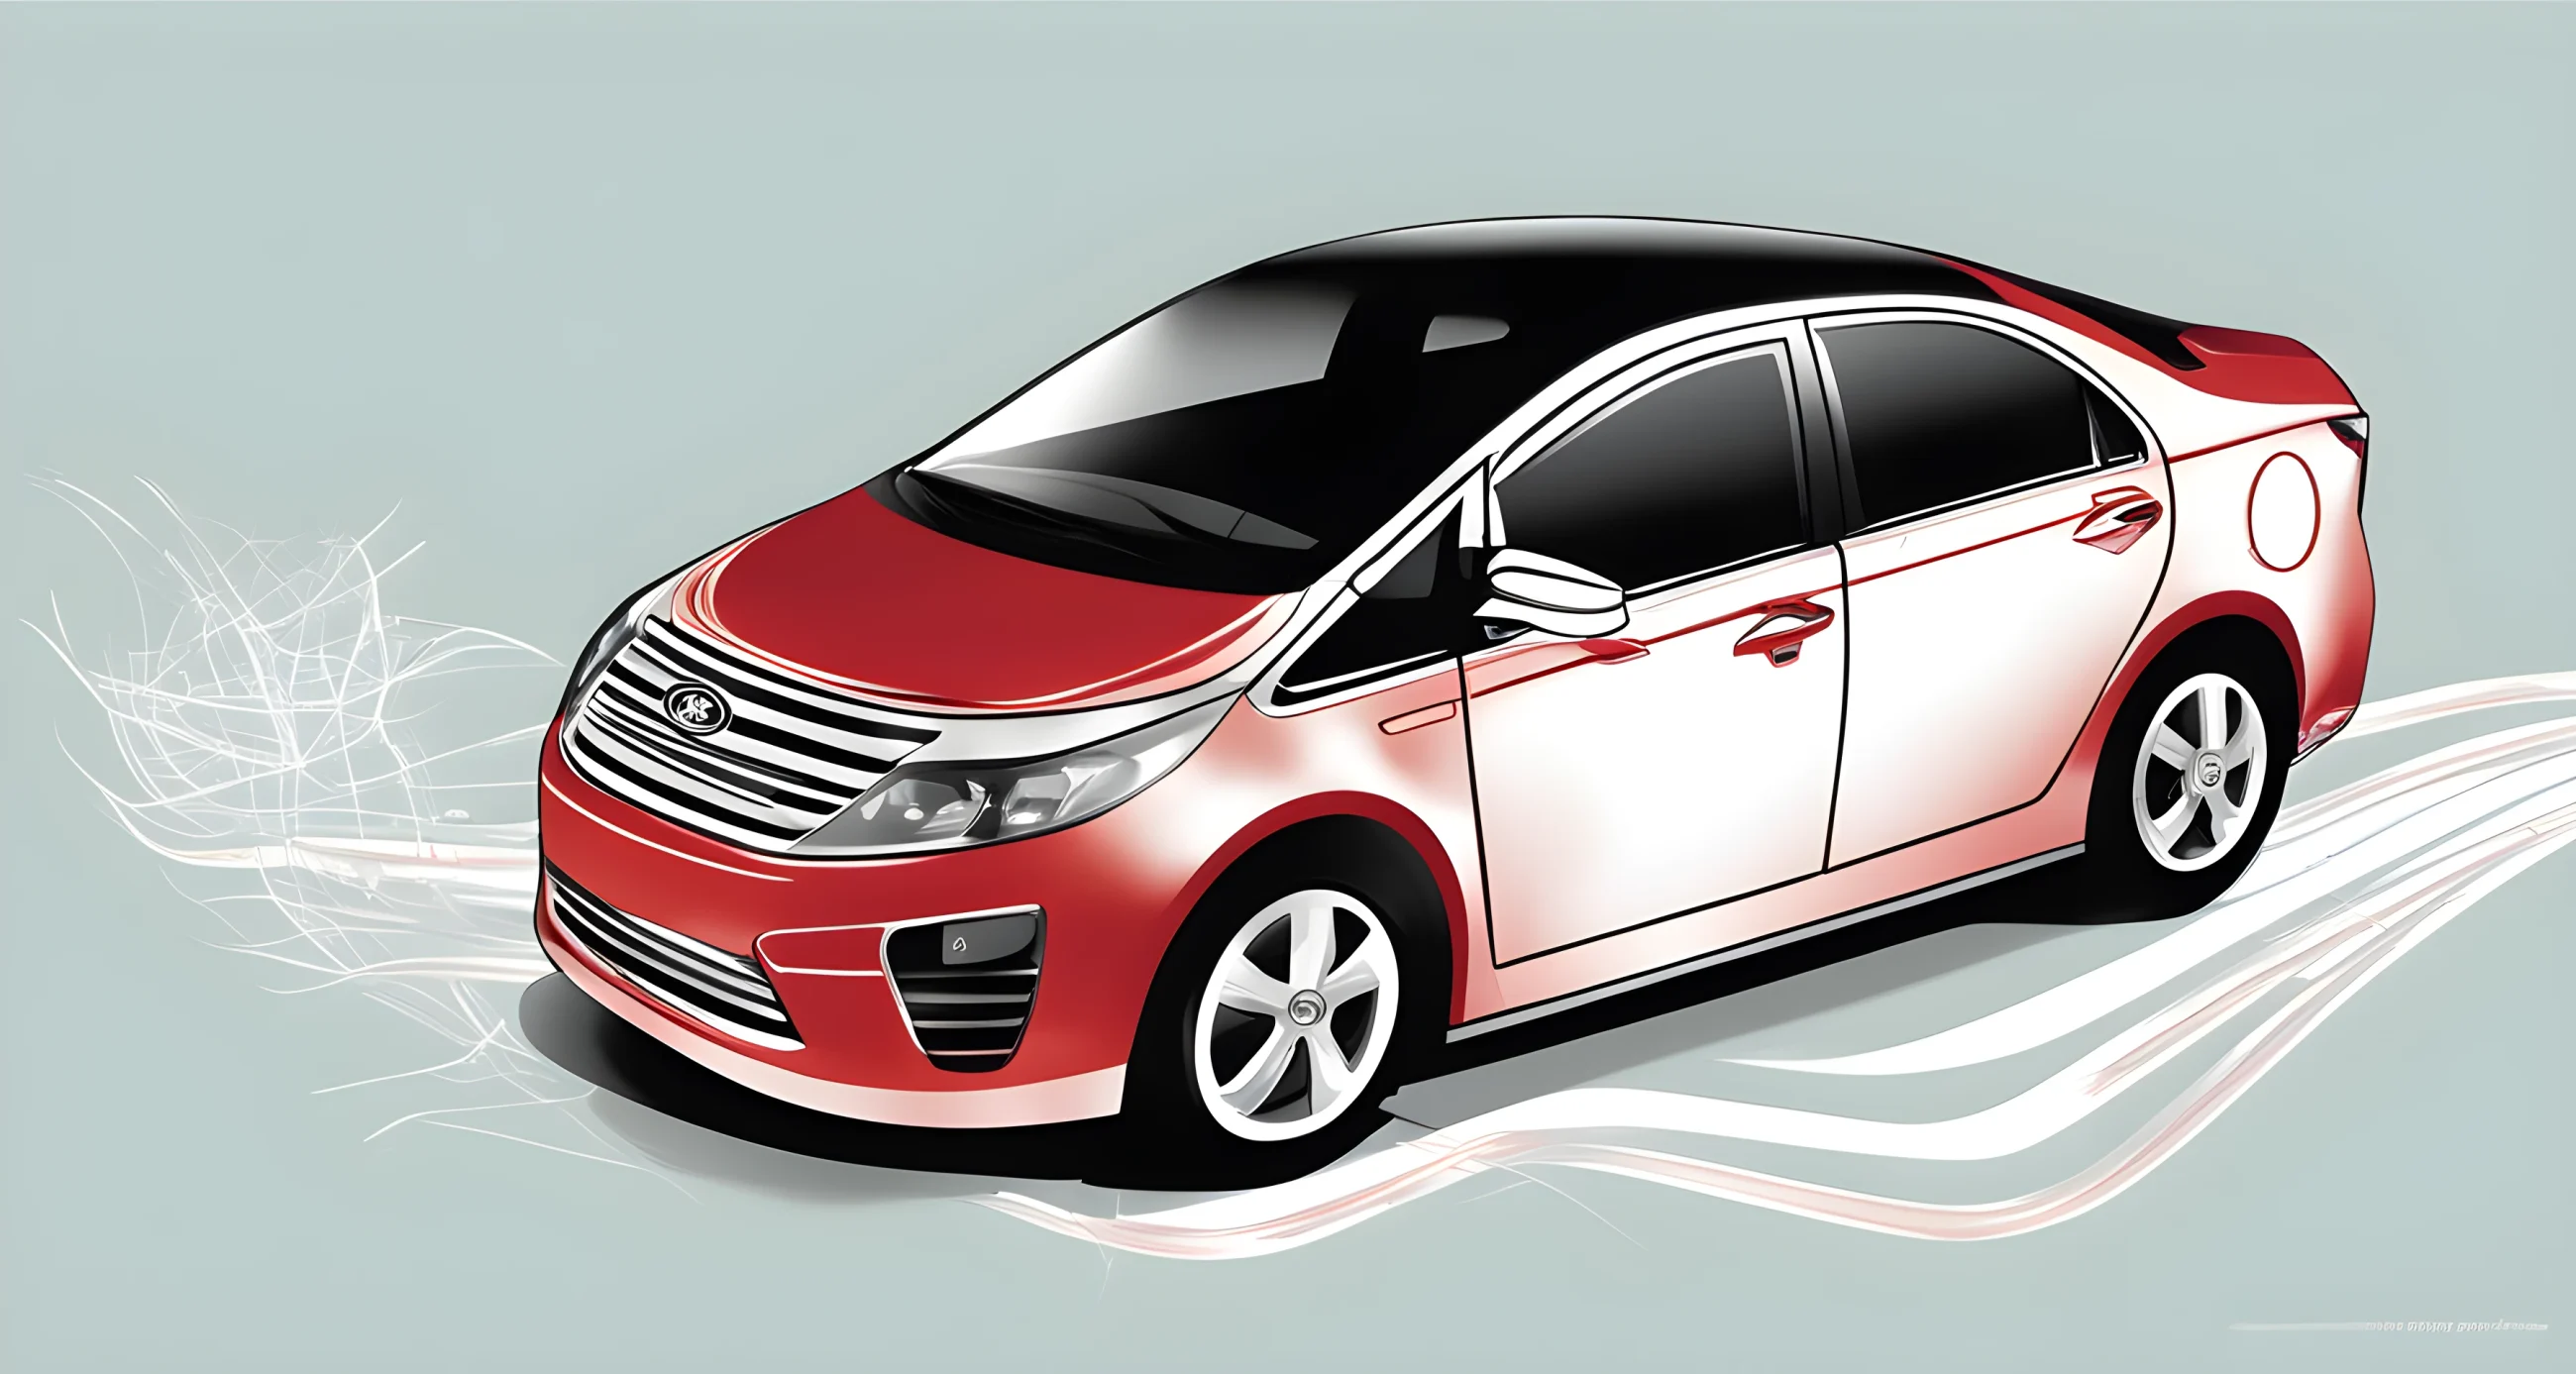 Addressing the Advantages of BYD Chinese Electric Cars